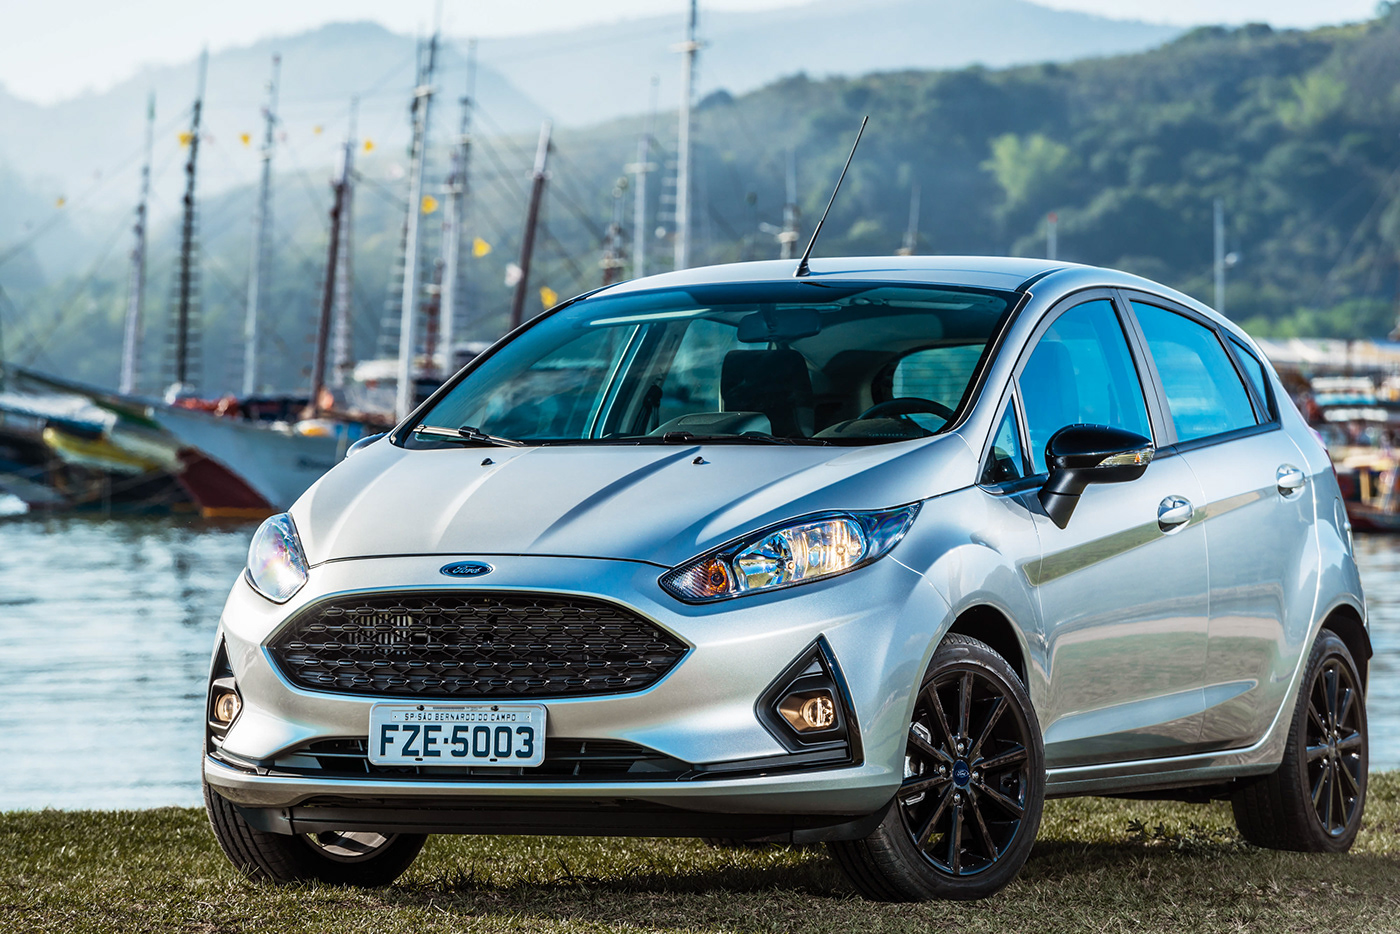 FORD NEW FIESTA 2018 BR on Behance